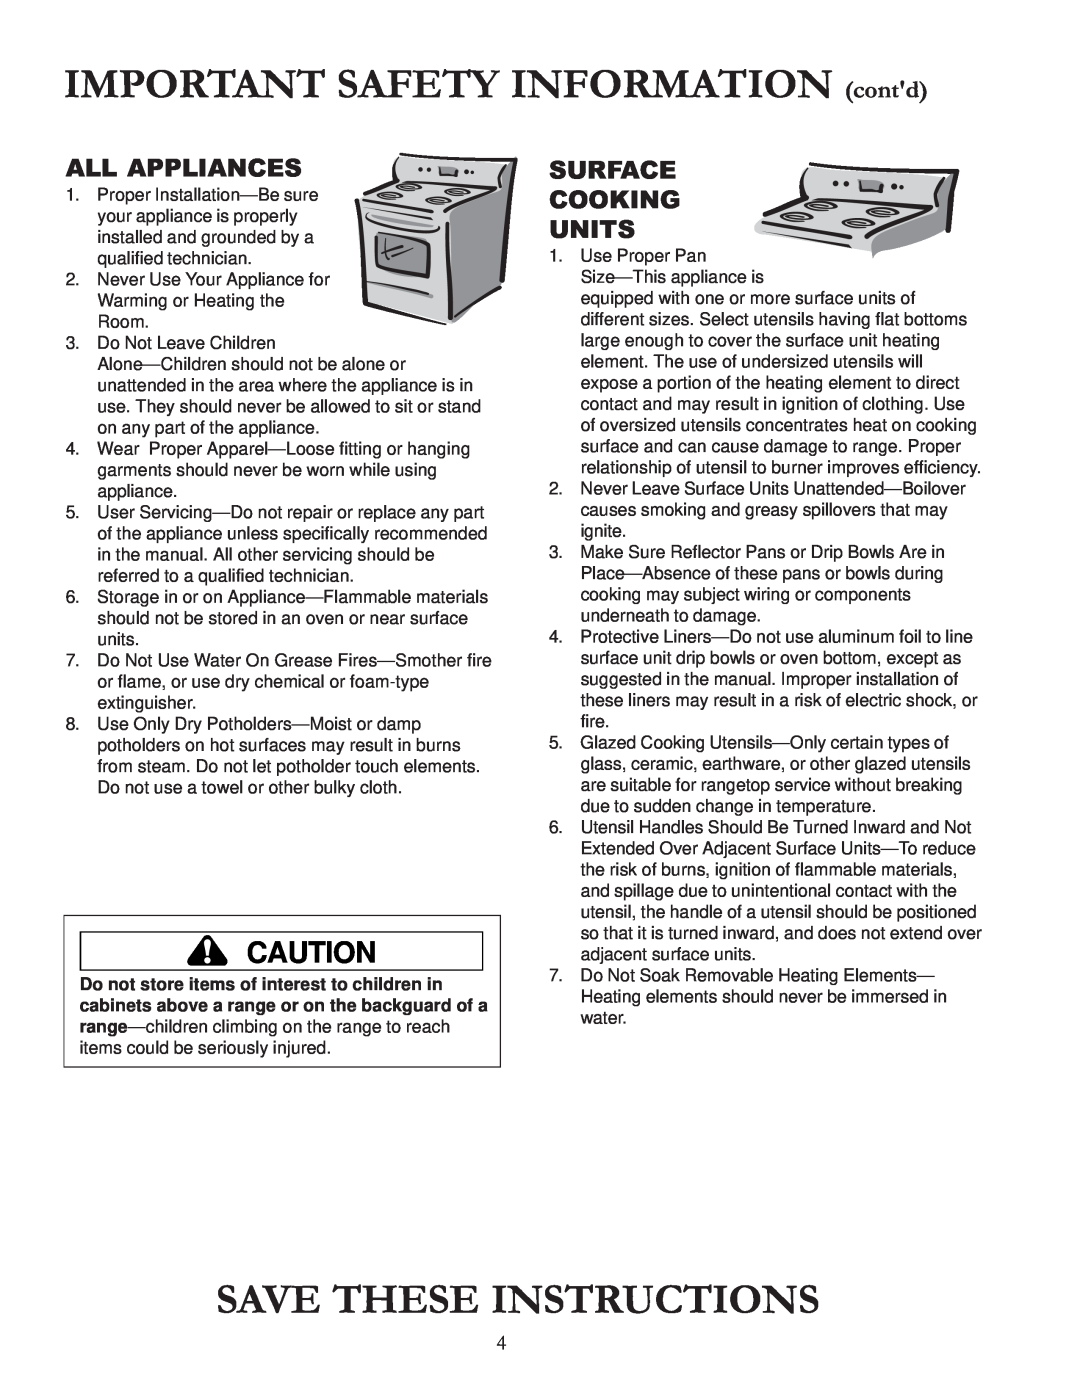 Amana ARR6420 IMPORTANT SAFETY INFORMATION contd, All Appliances, Surface Cooking Units, Save These Instructions 